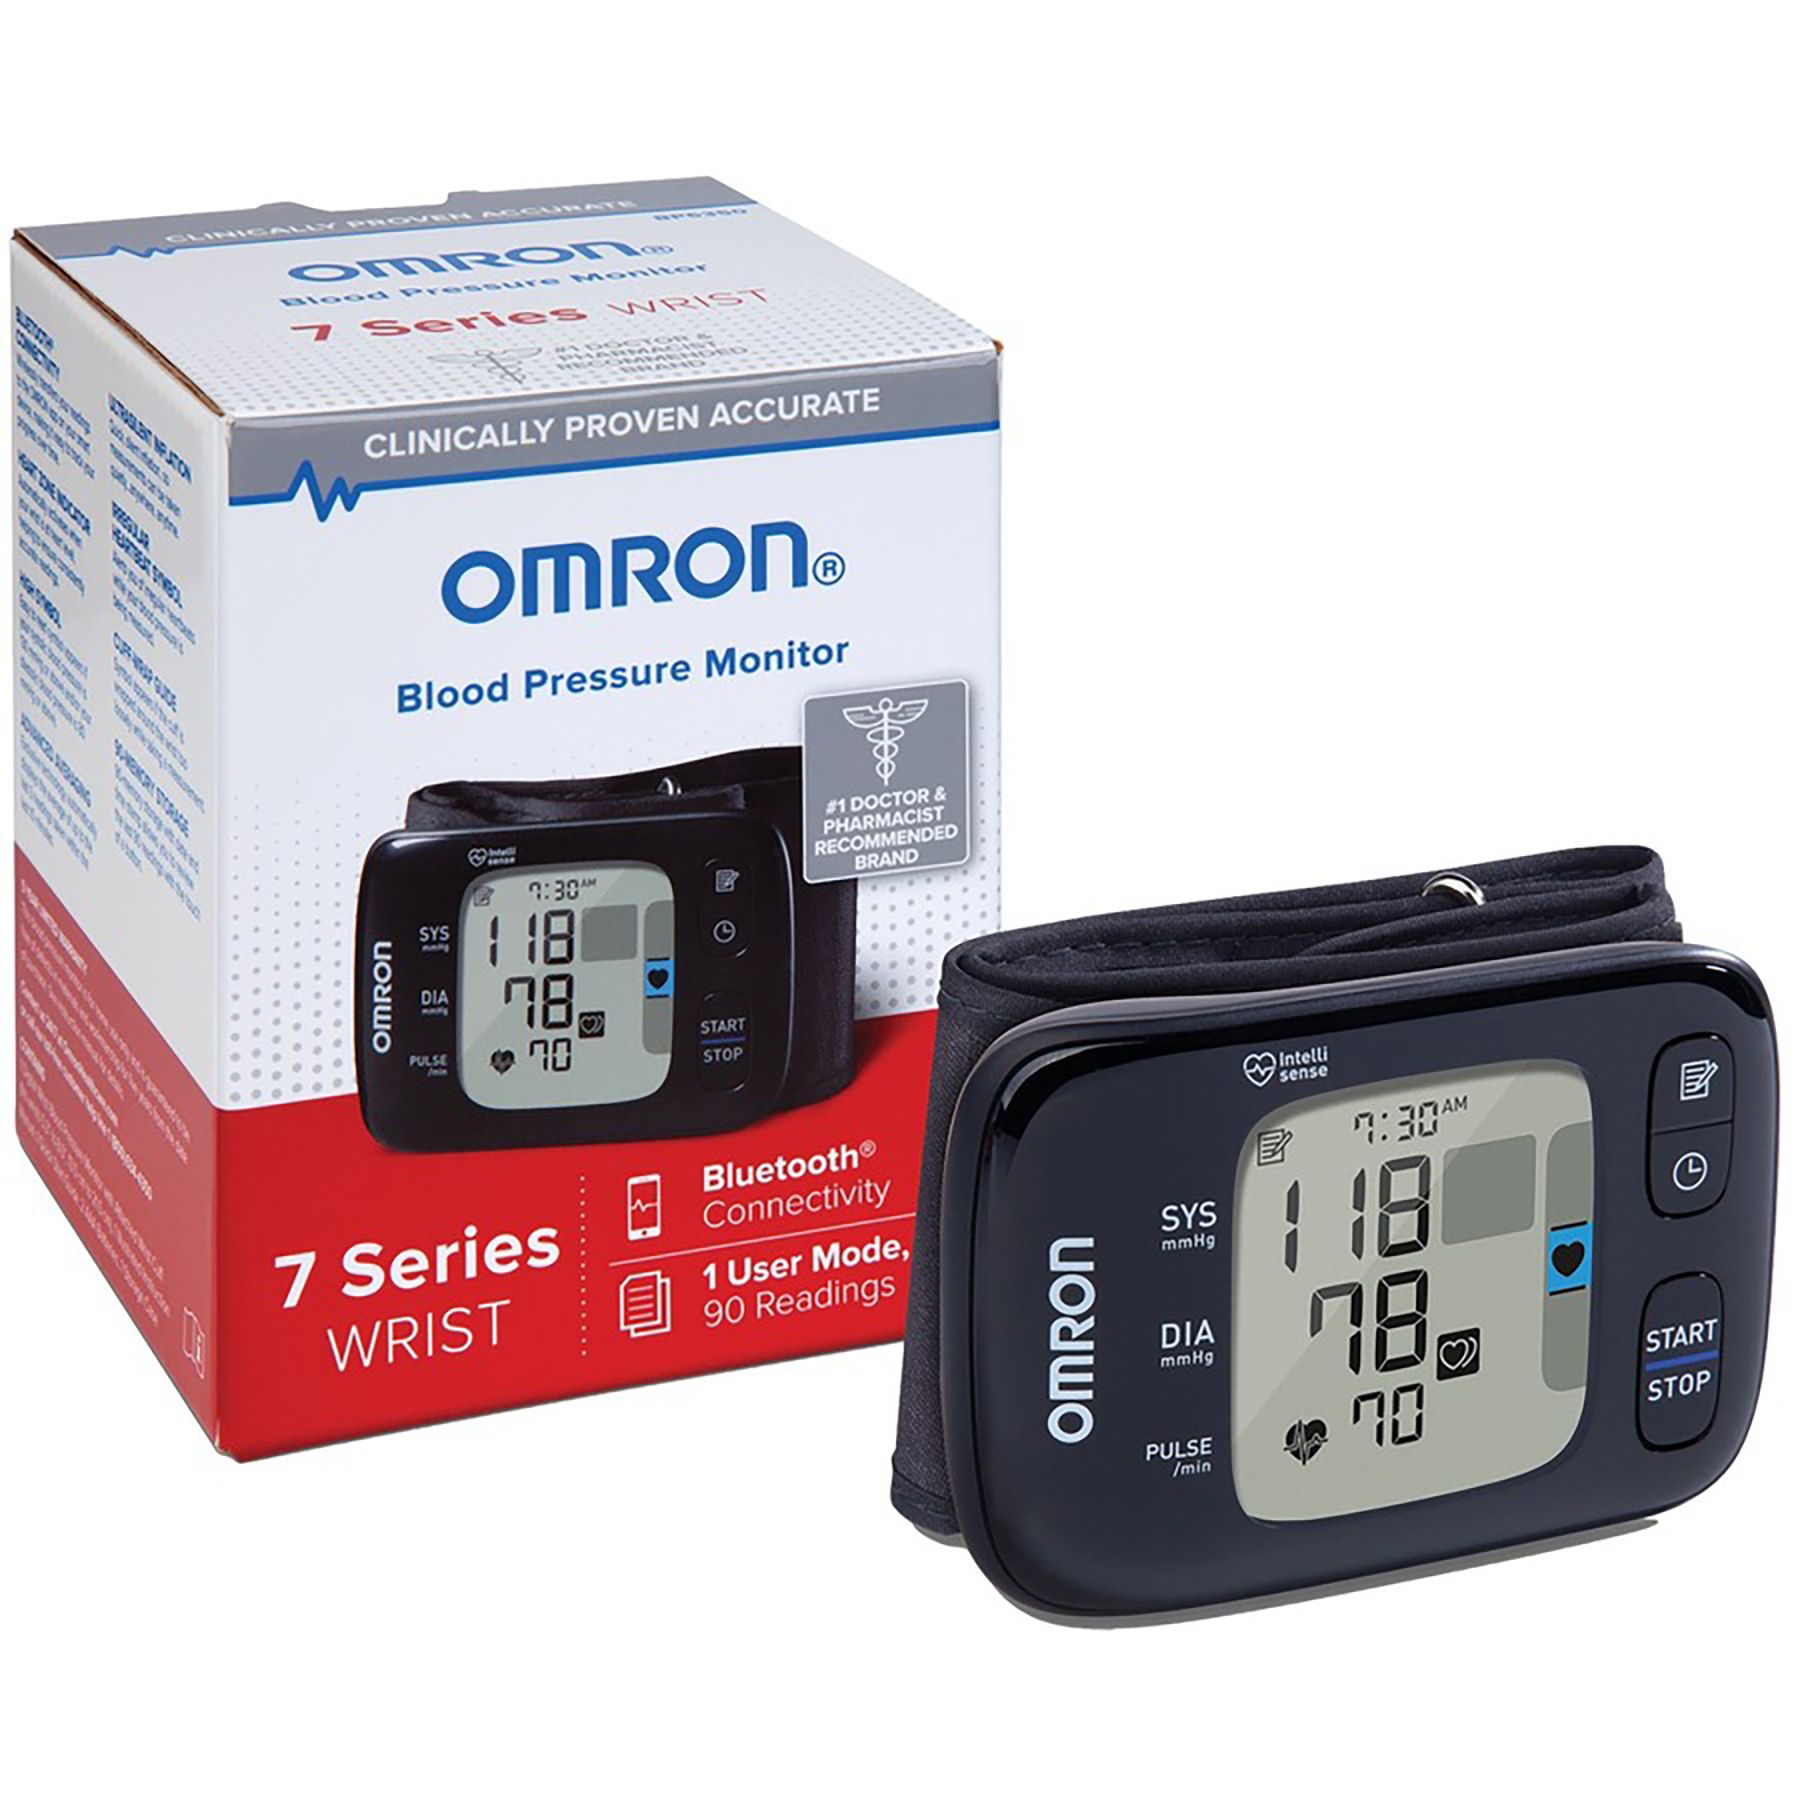 With the new range of OMRON Bluetooth Blood Pressure Monitors, you